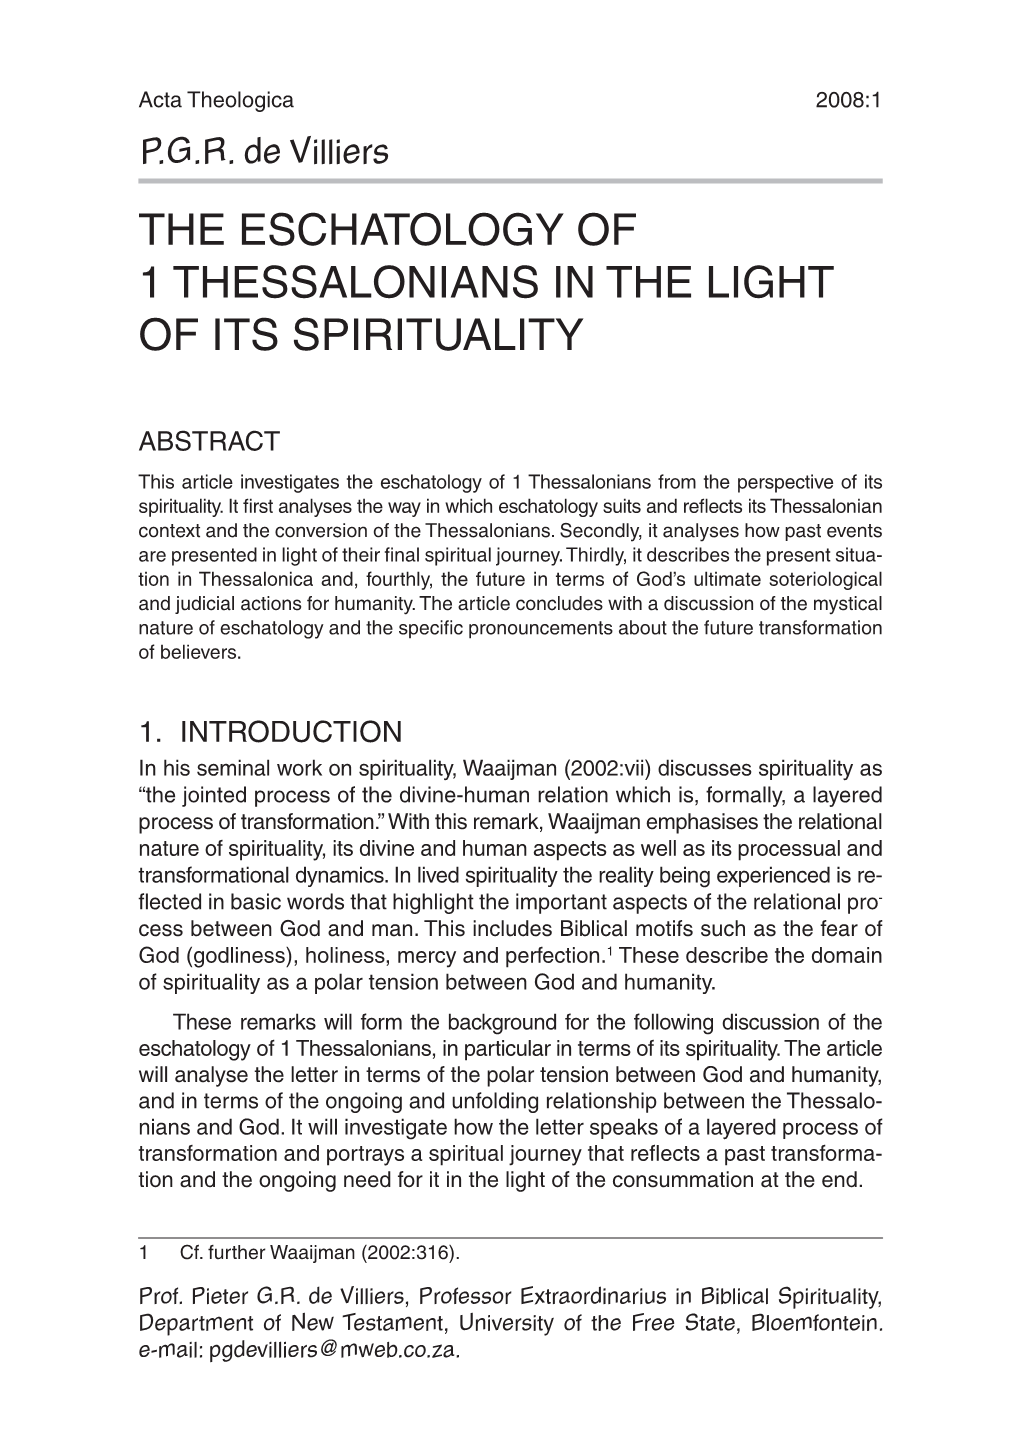 THE ESCHATOLOGY of 1 THESSALONIANS in the LIGHT of ITS SPIRITUALITY